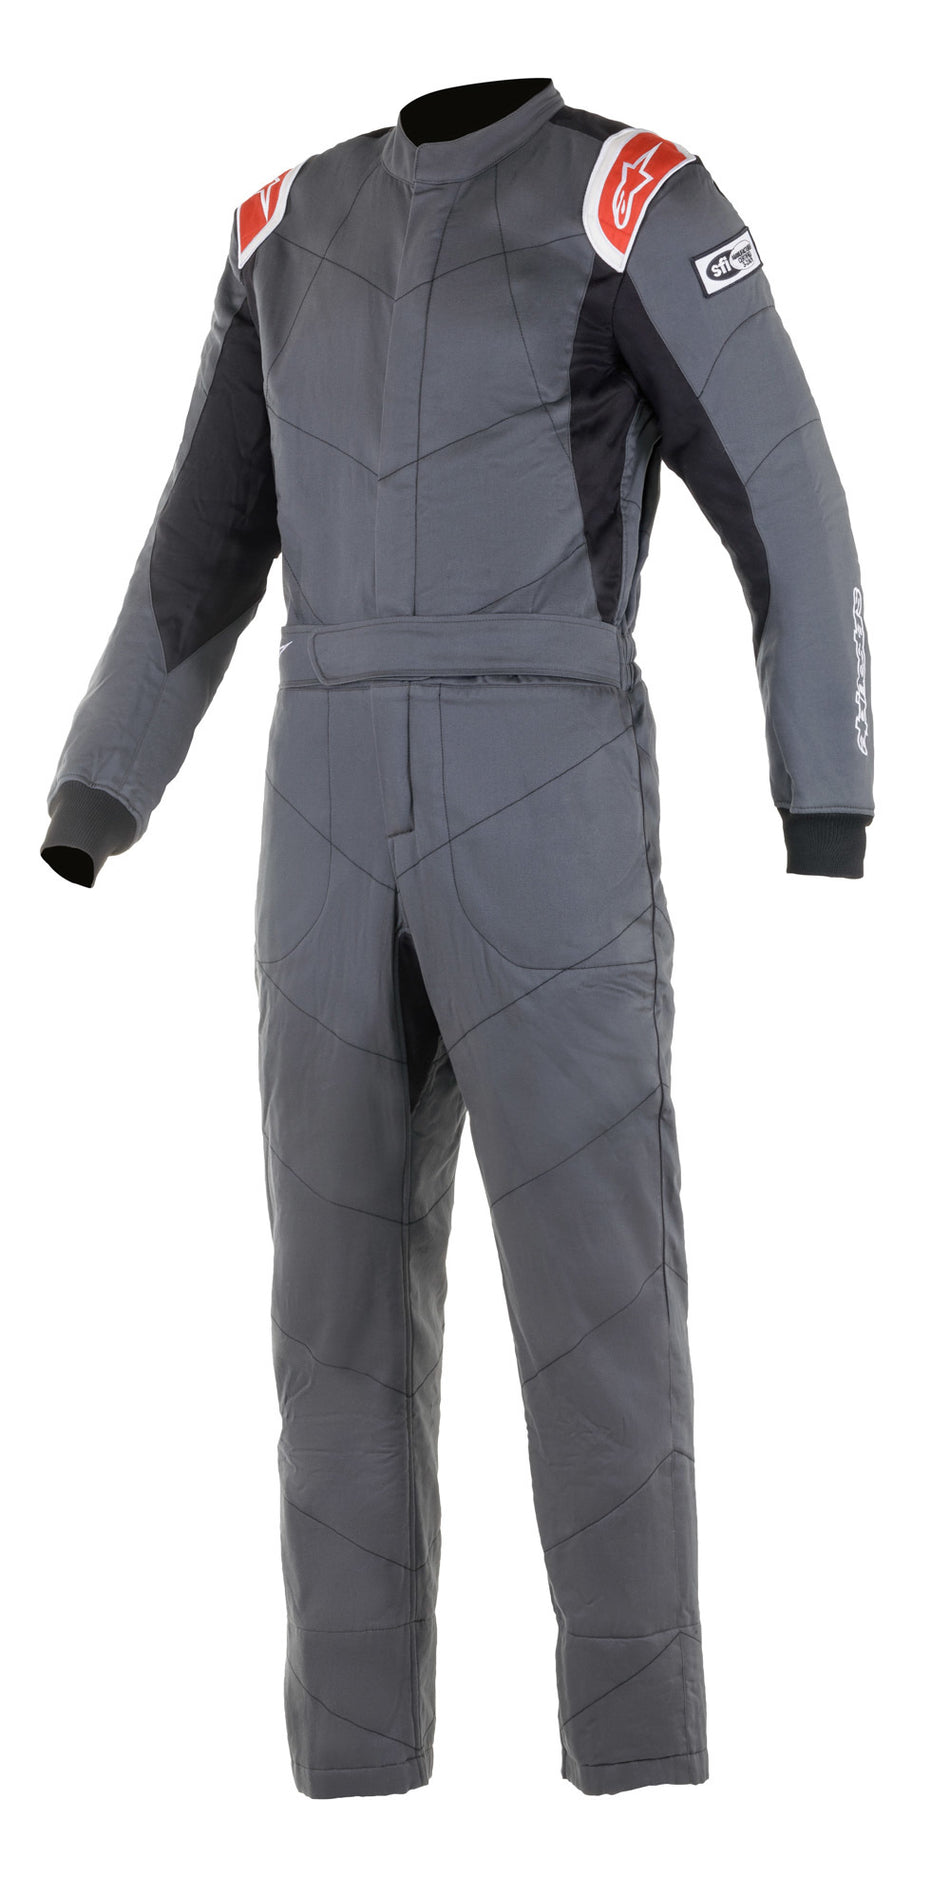 Driving Suit - Knoxville V2 - 1-Piece - SFI 3.2A/5 - Boot-Cut - Triple Layer - Fire Retardant Fabric - Gray / Red - Size 44 - 2X-Small - Each